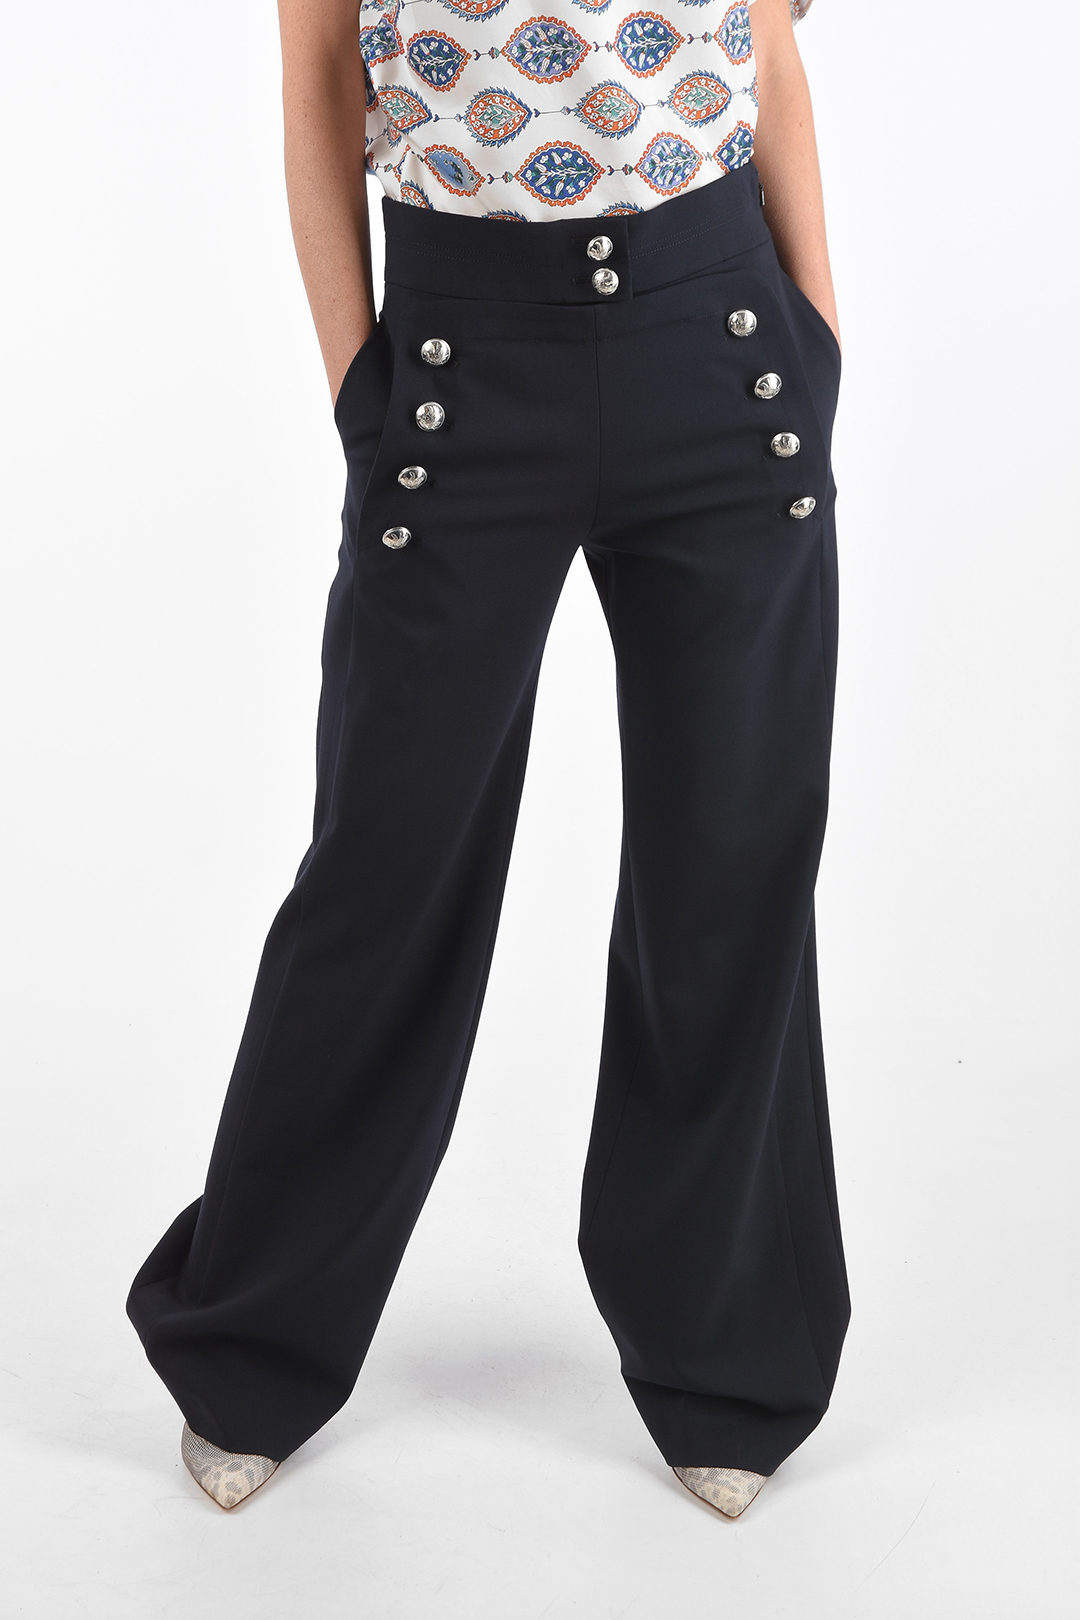 2 Button Pants by Comfy USA at Hello Boutique